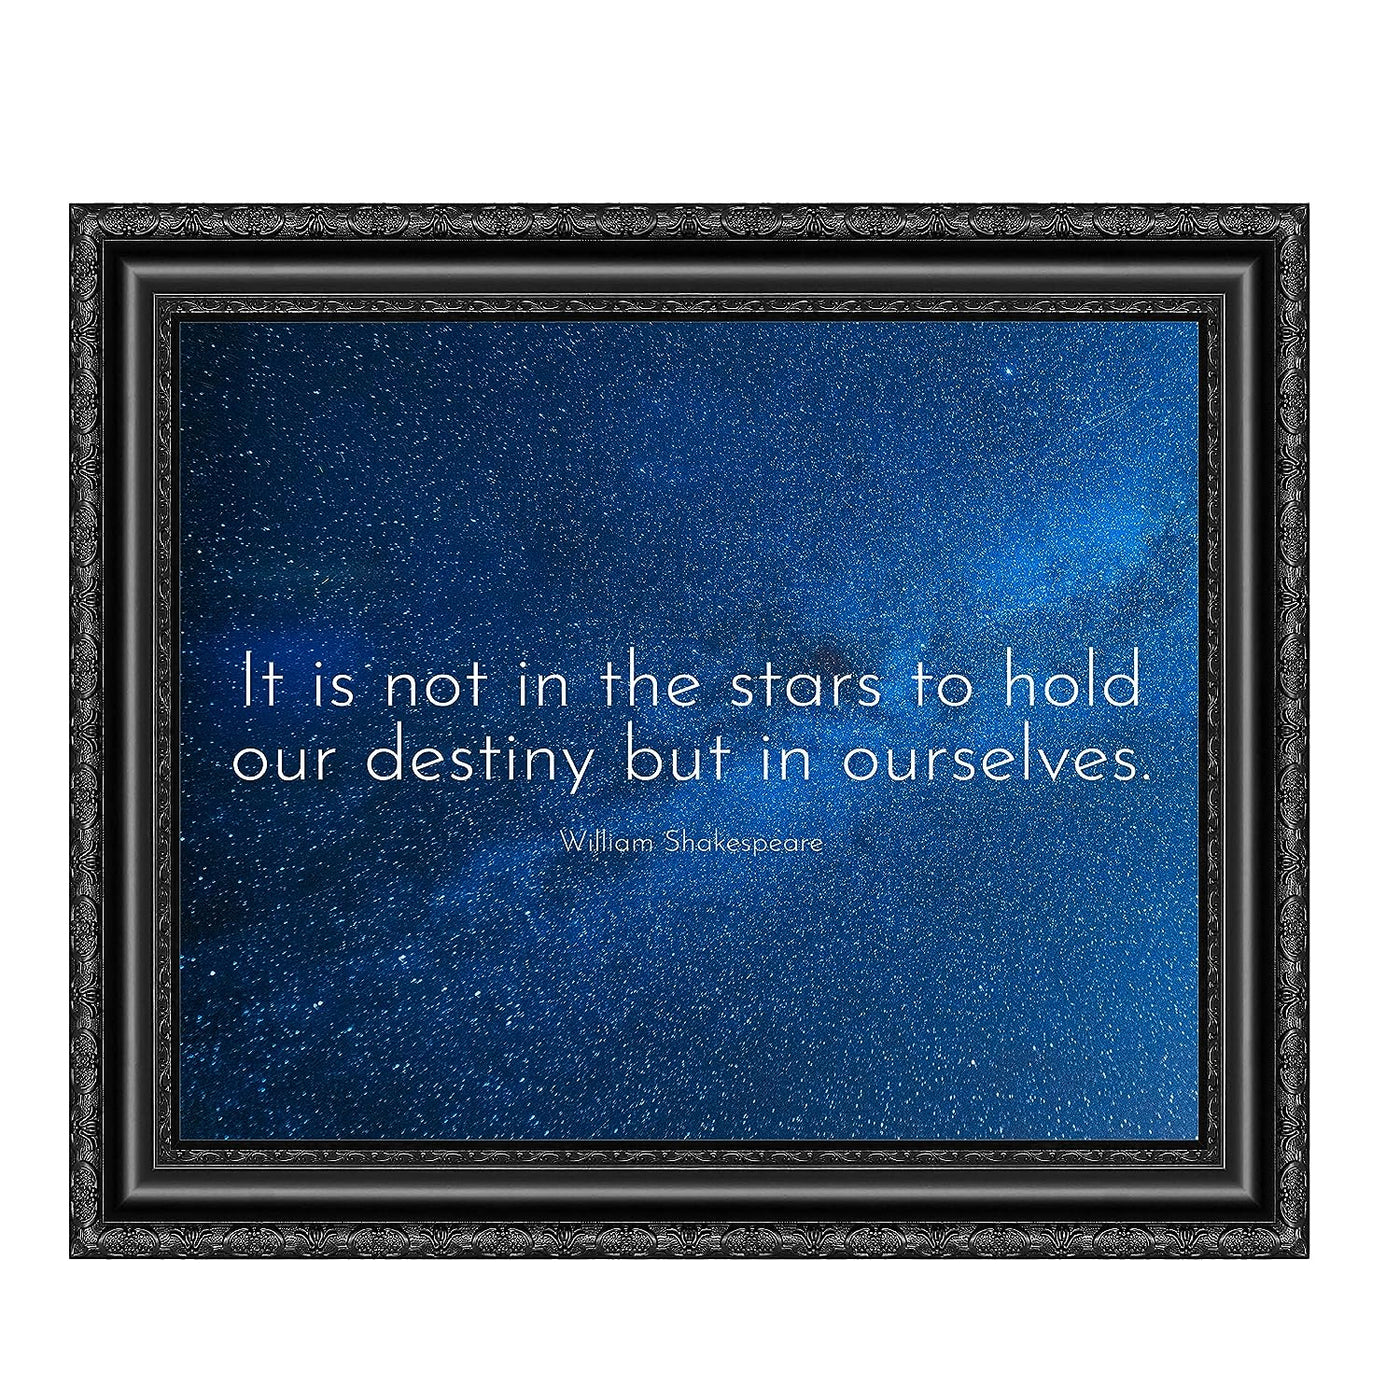 Shakespeare Quotes-"Not In the Stars to Hold Our Destiny-In Ourselves"-Inspirational Literary Wall Art -10 x 8" Starry Night Typography Print-Ready to Frame. Perfect Home-Office-School-Library Decor!